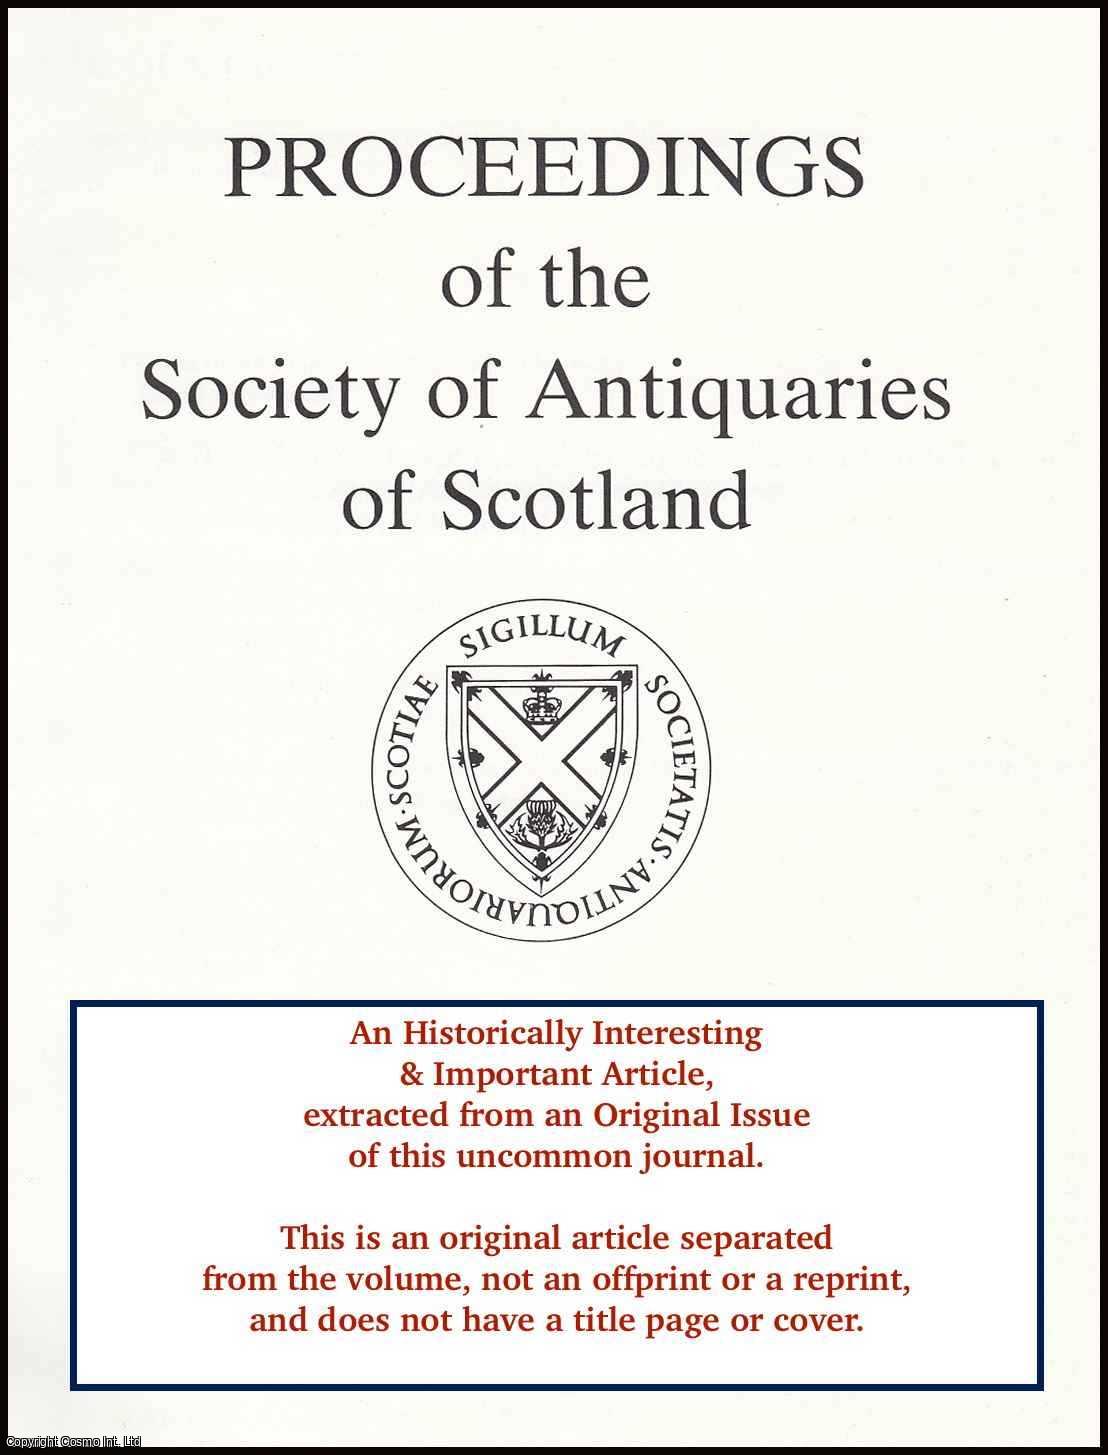 David J. Breeze - Roman Forces and Native Populations. An original article from the Society of Antiquaries of Scotland, 1985.